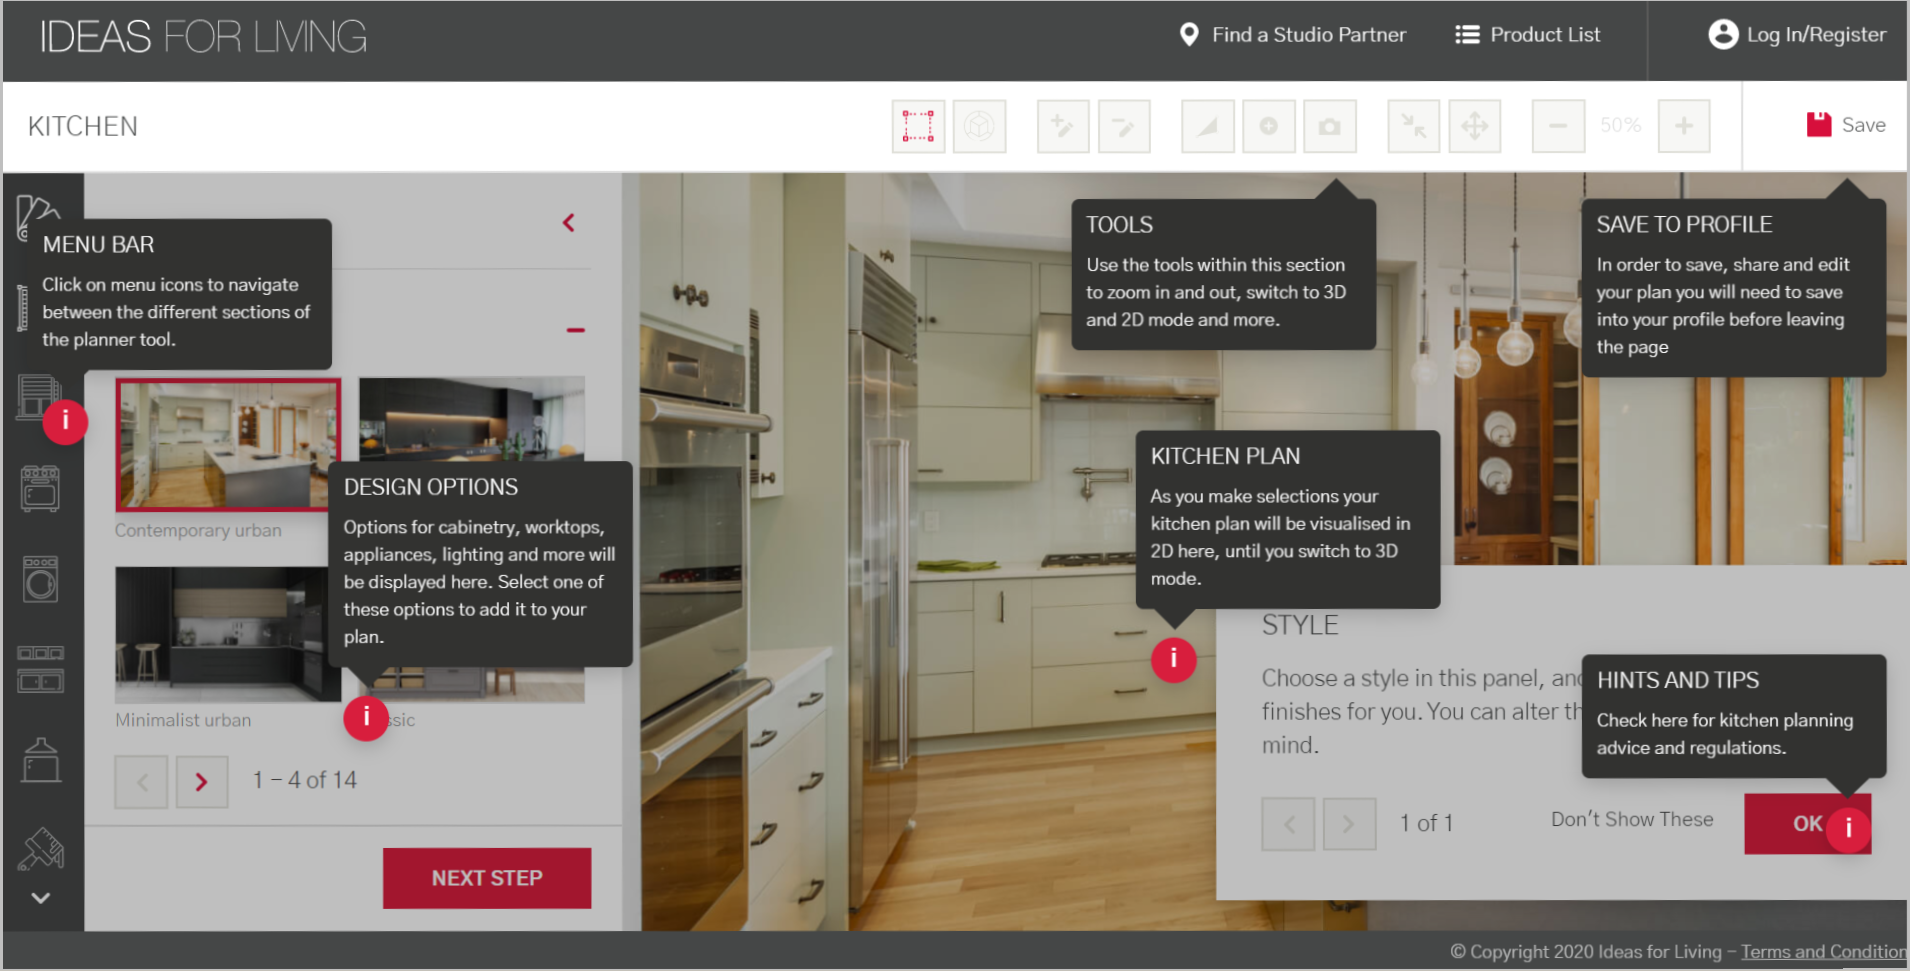 Virtual kitchen planning tools to help plan your renovation